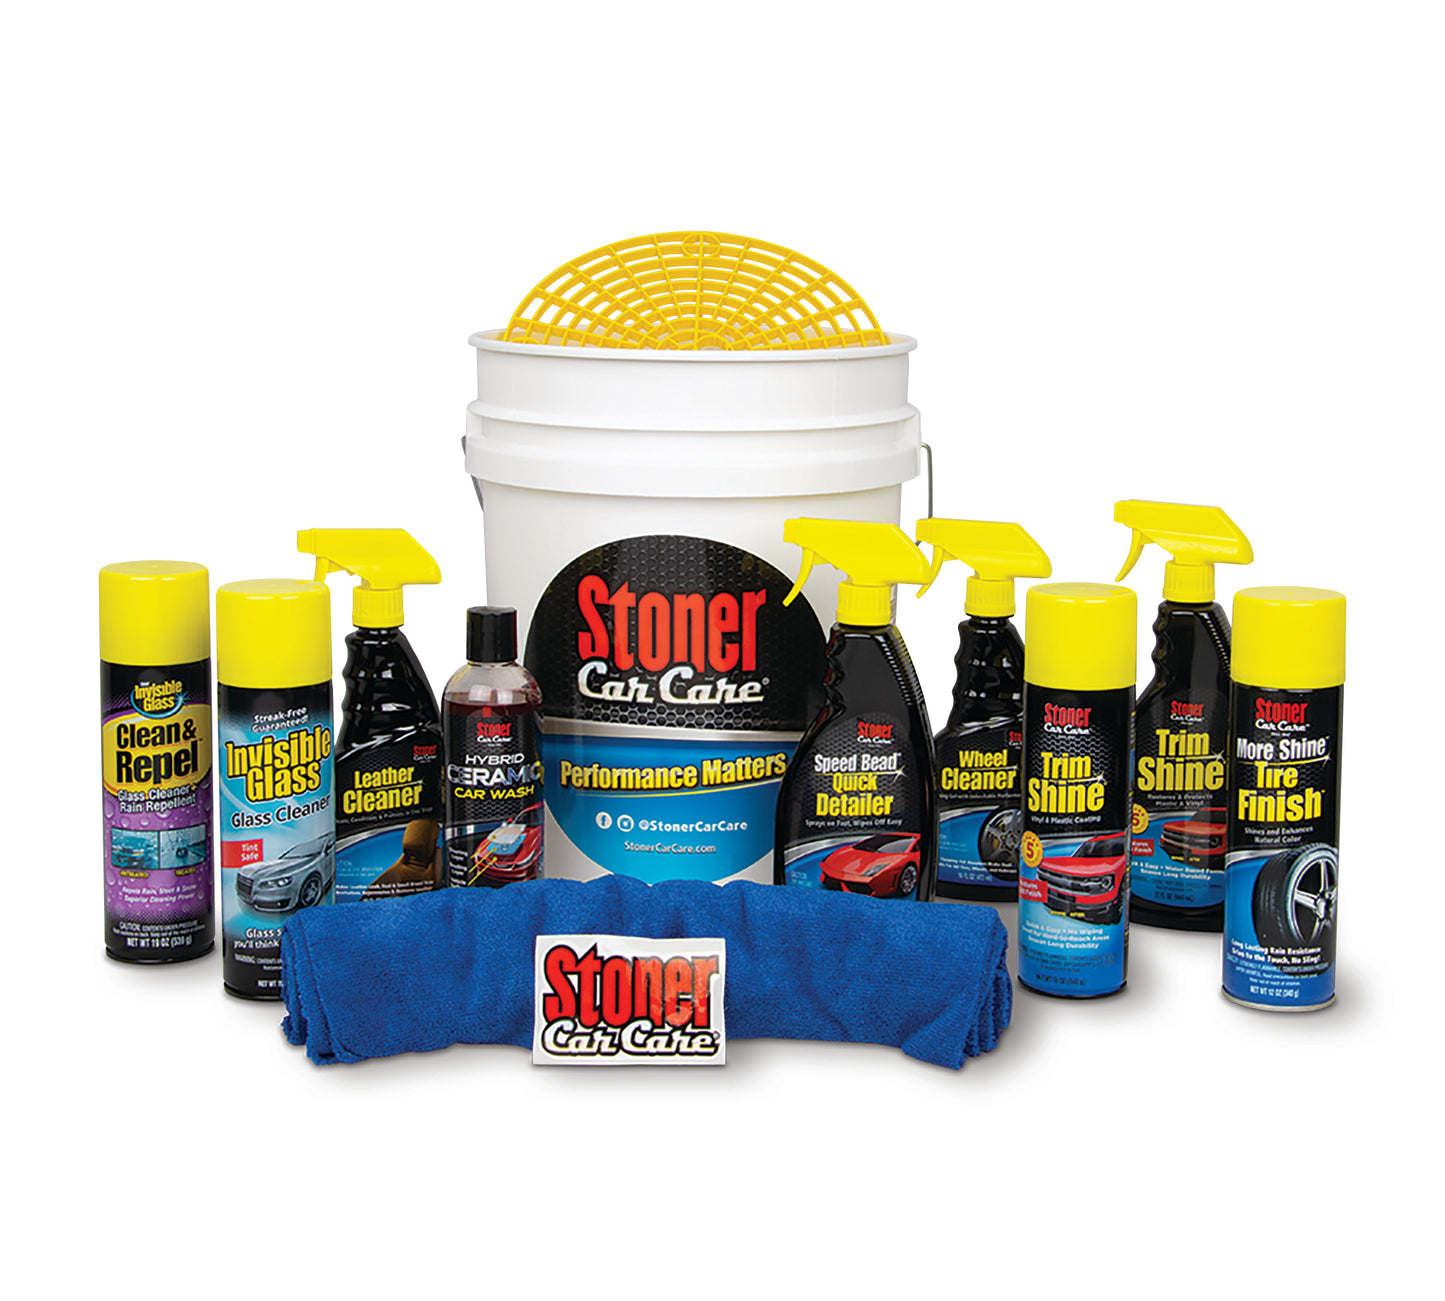 Car Care Supplies Deluxe Subscription Box (3 Month Trial) – GloveBox